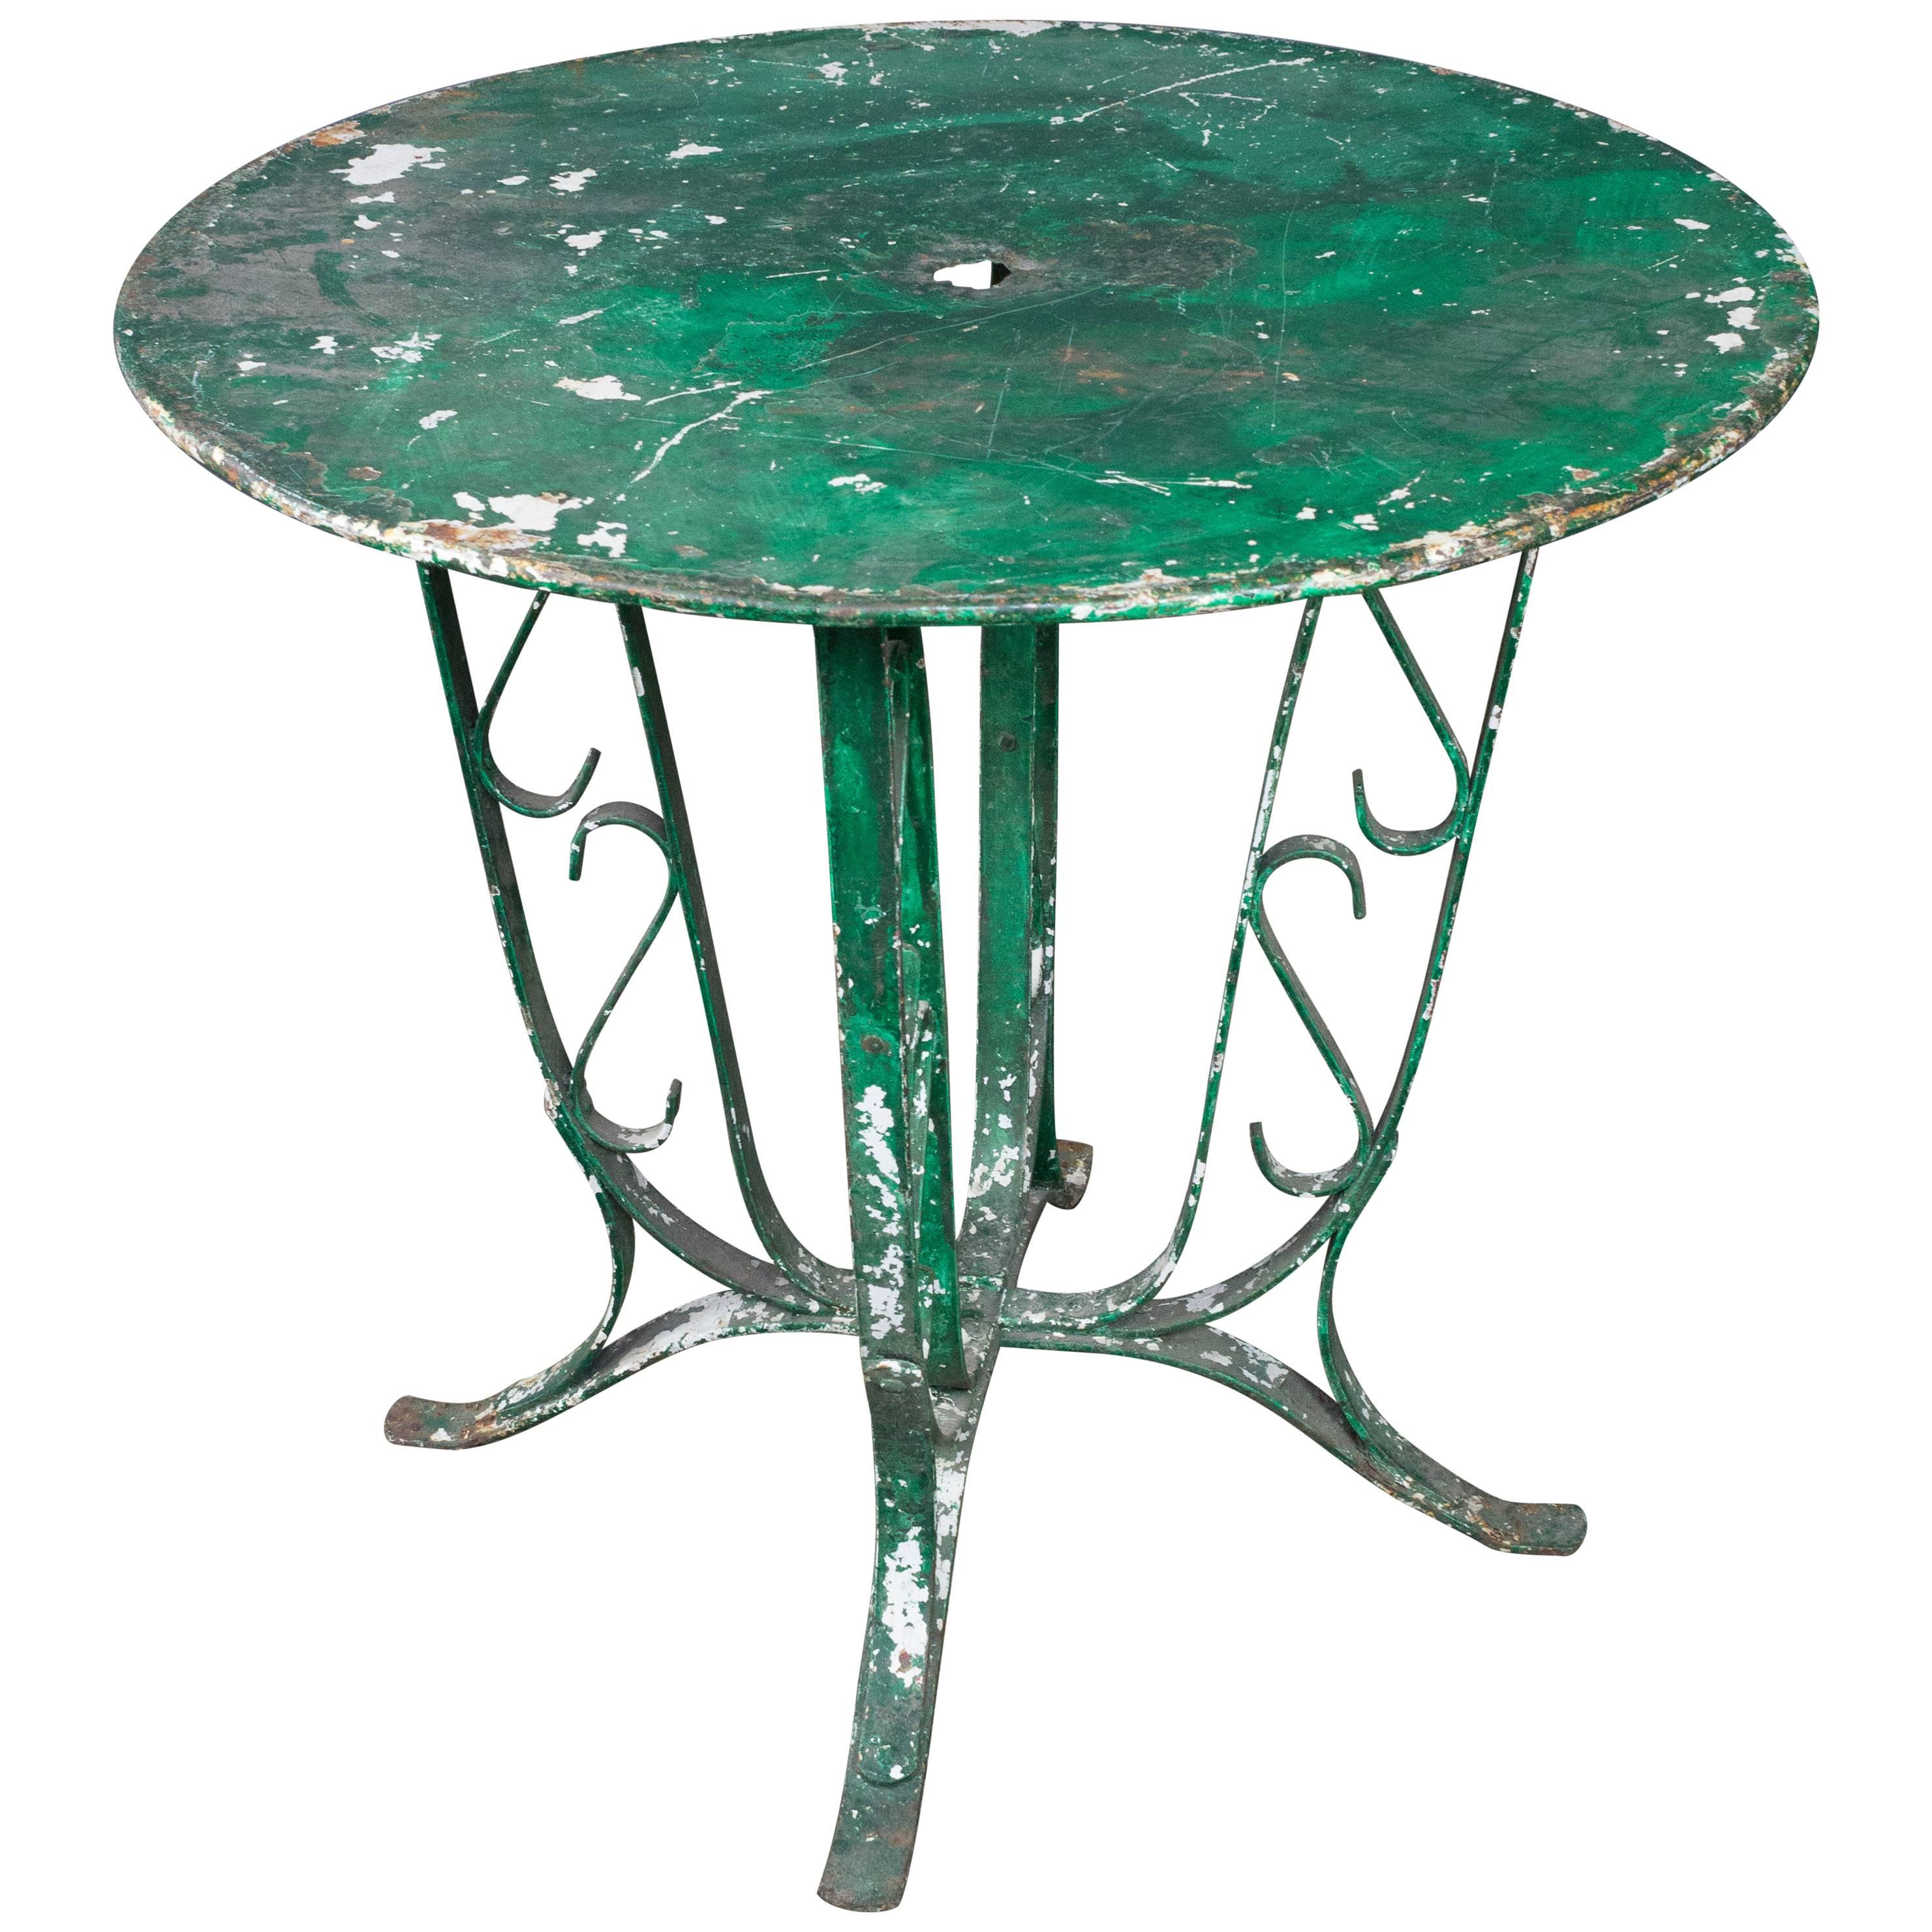 French 1920's  Garden Table  with Distressed Green Paint